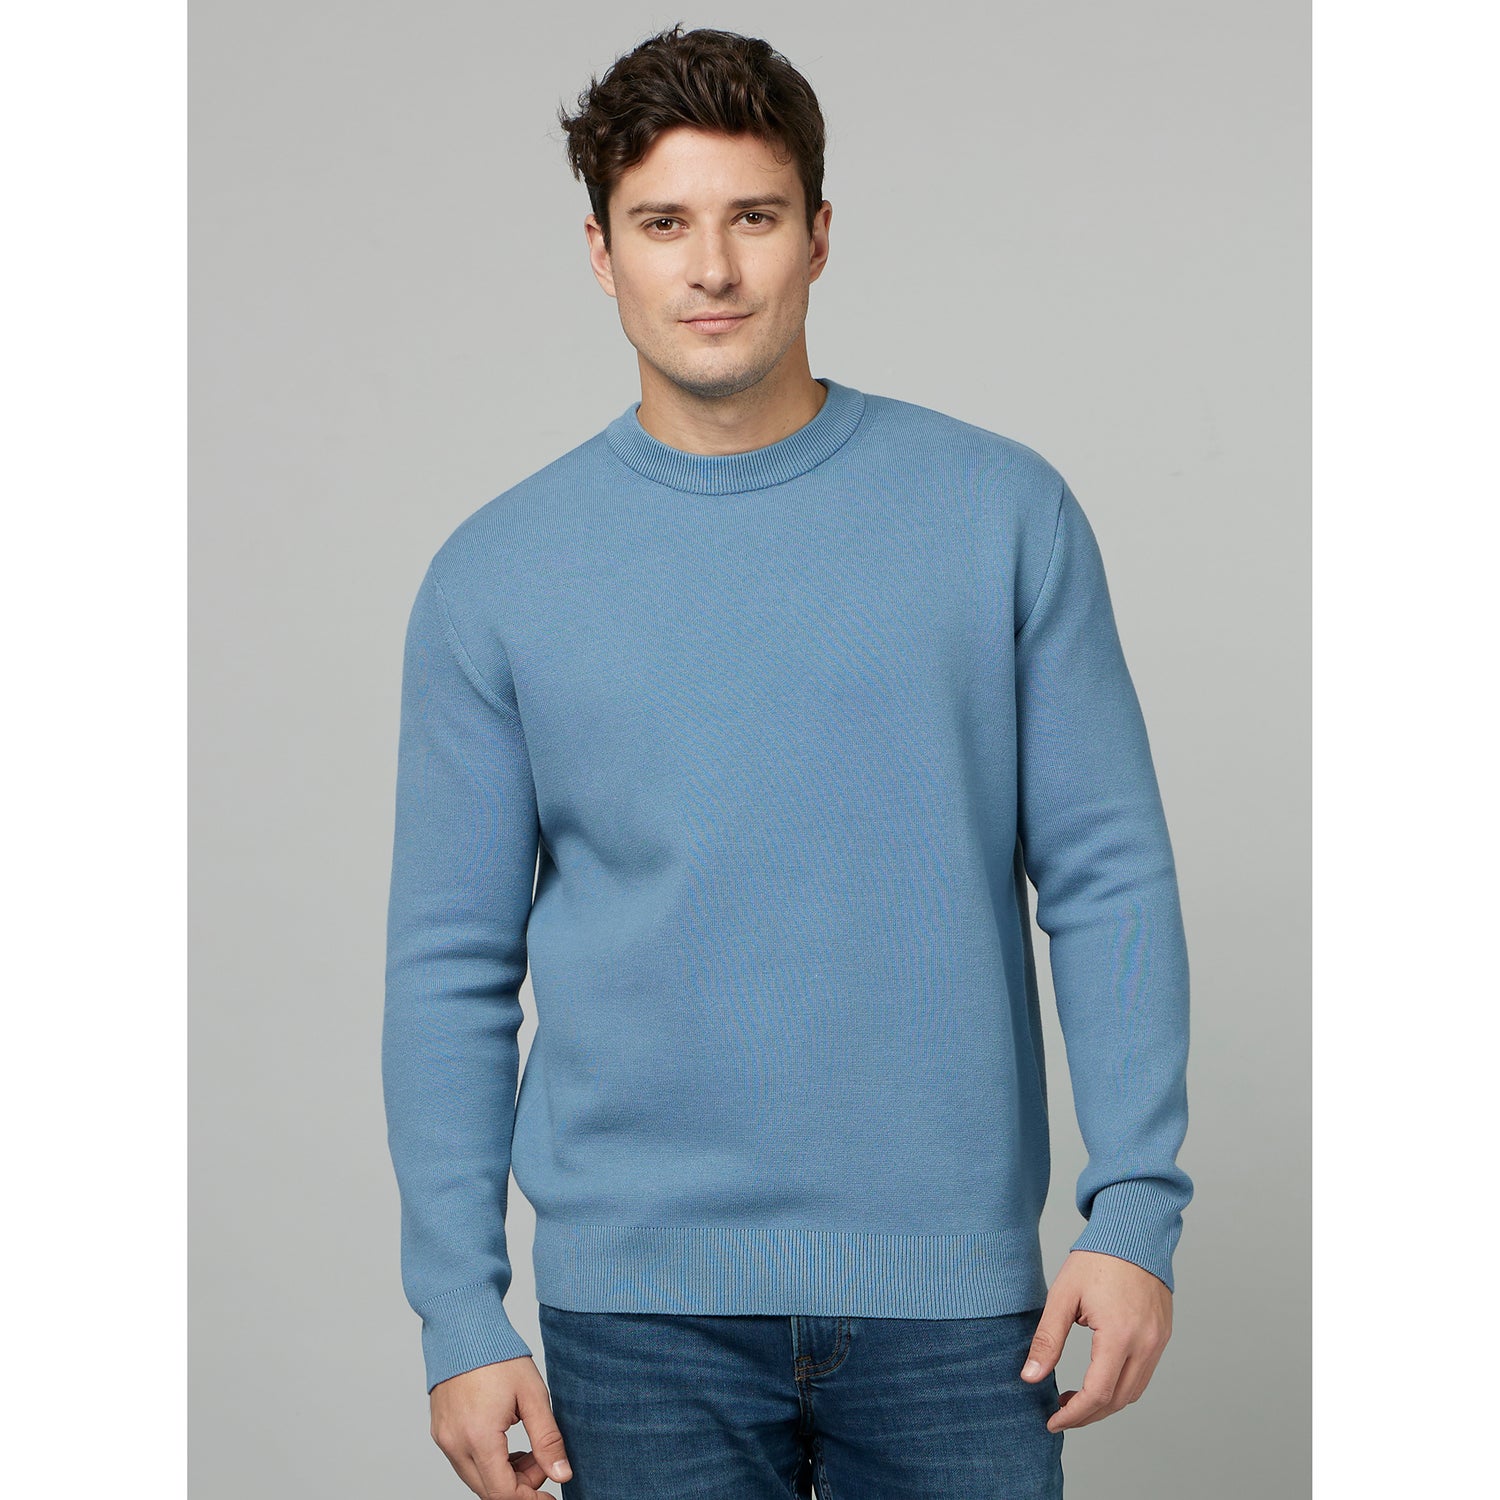 Blue Stone Round Neck Full Sleeves Cotton Pullover Sweater (BECLO)